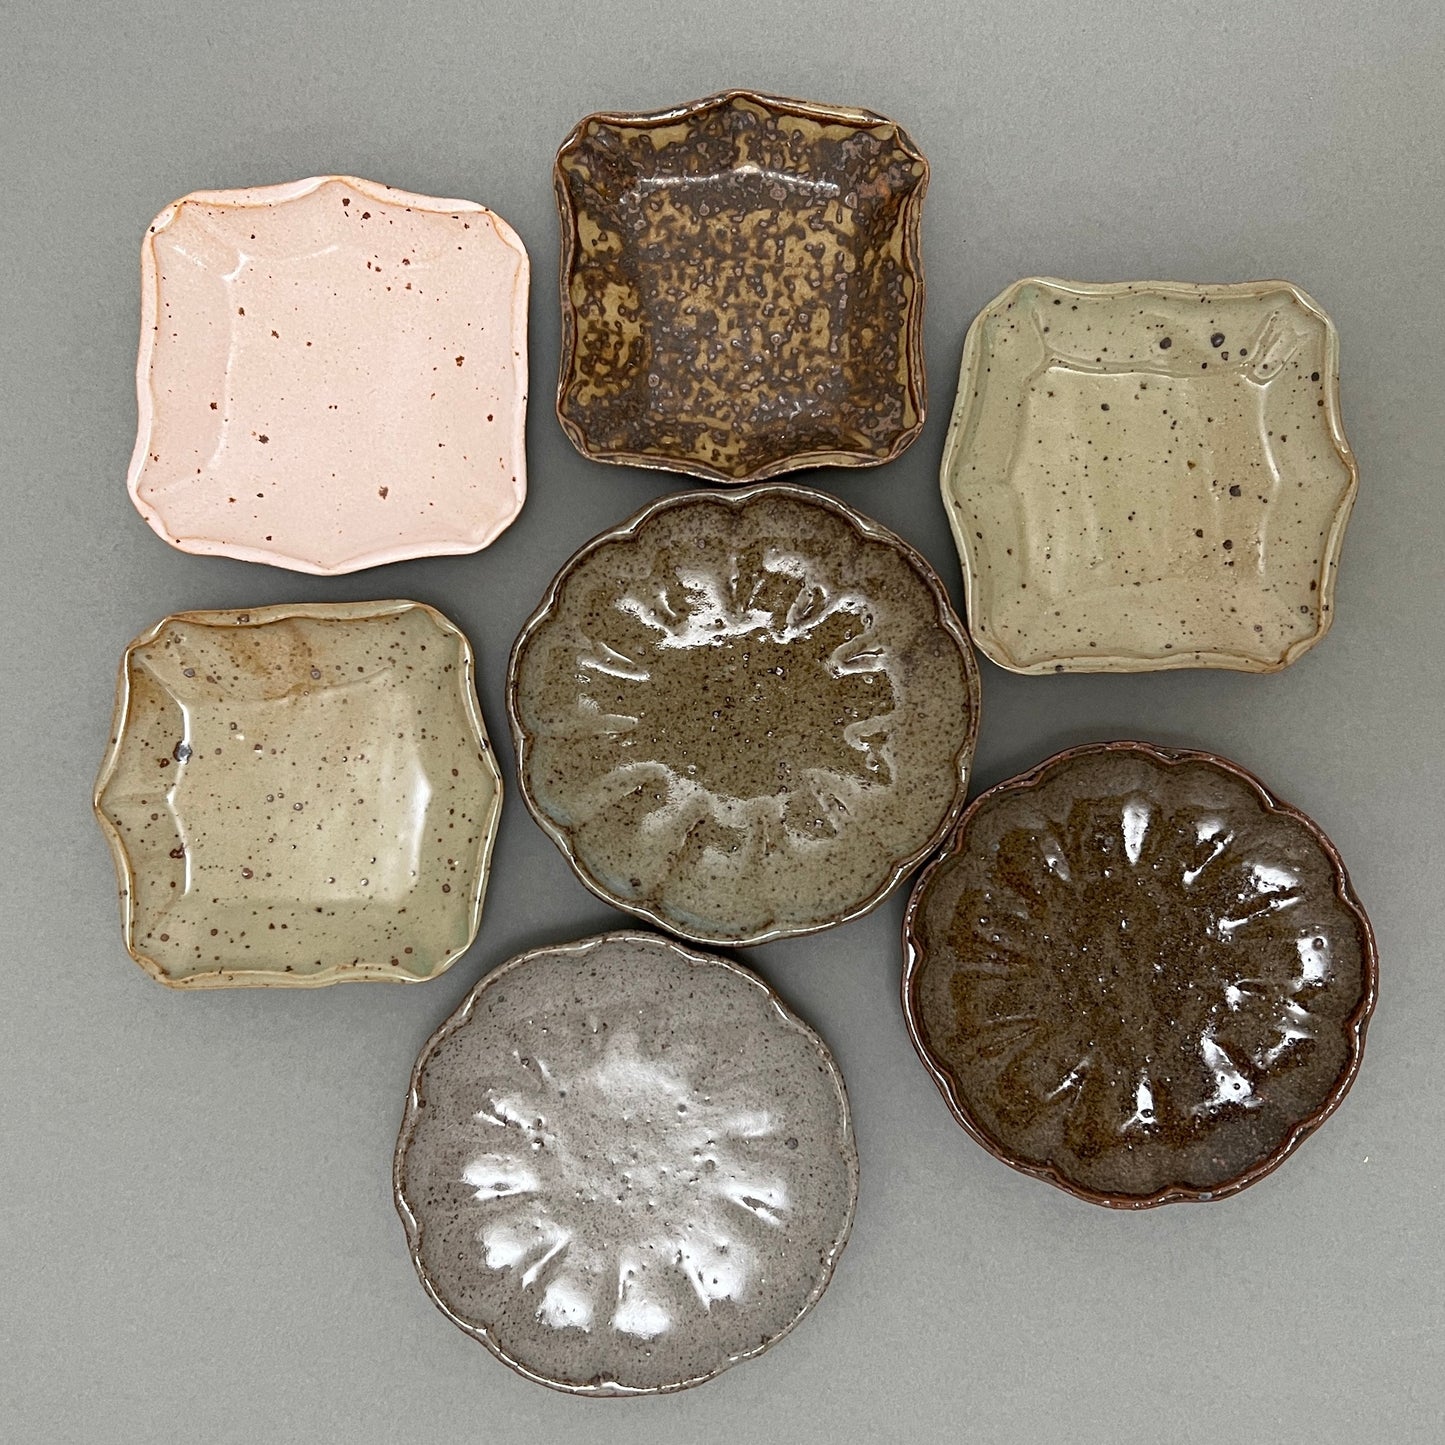 A group of seven small different color and shaped ceramic plates laying next to each other on a grey background